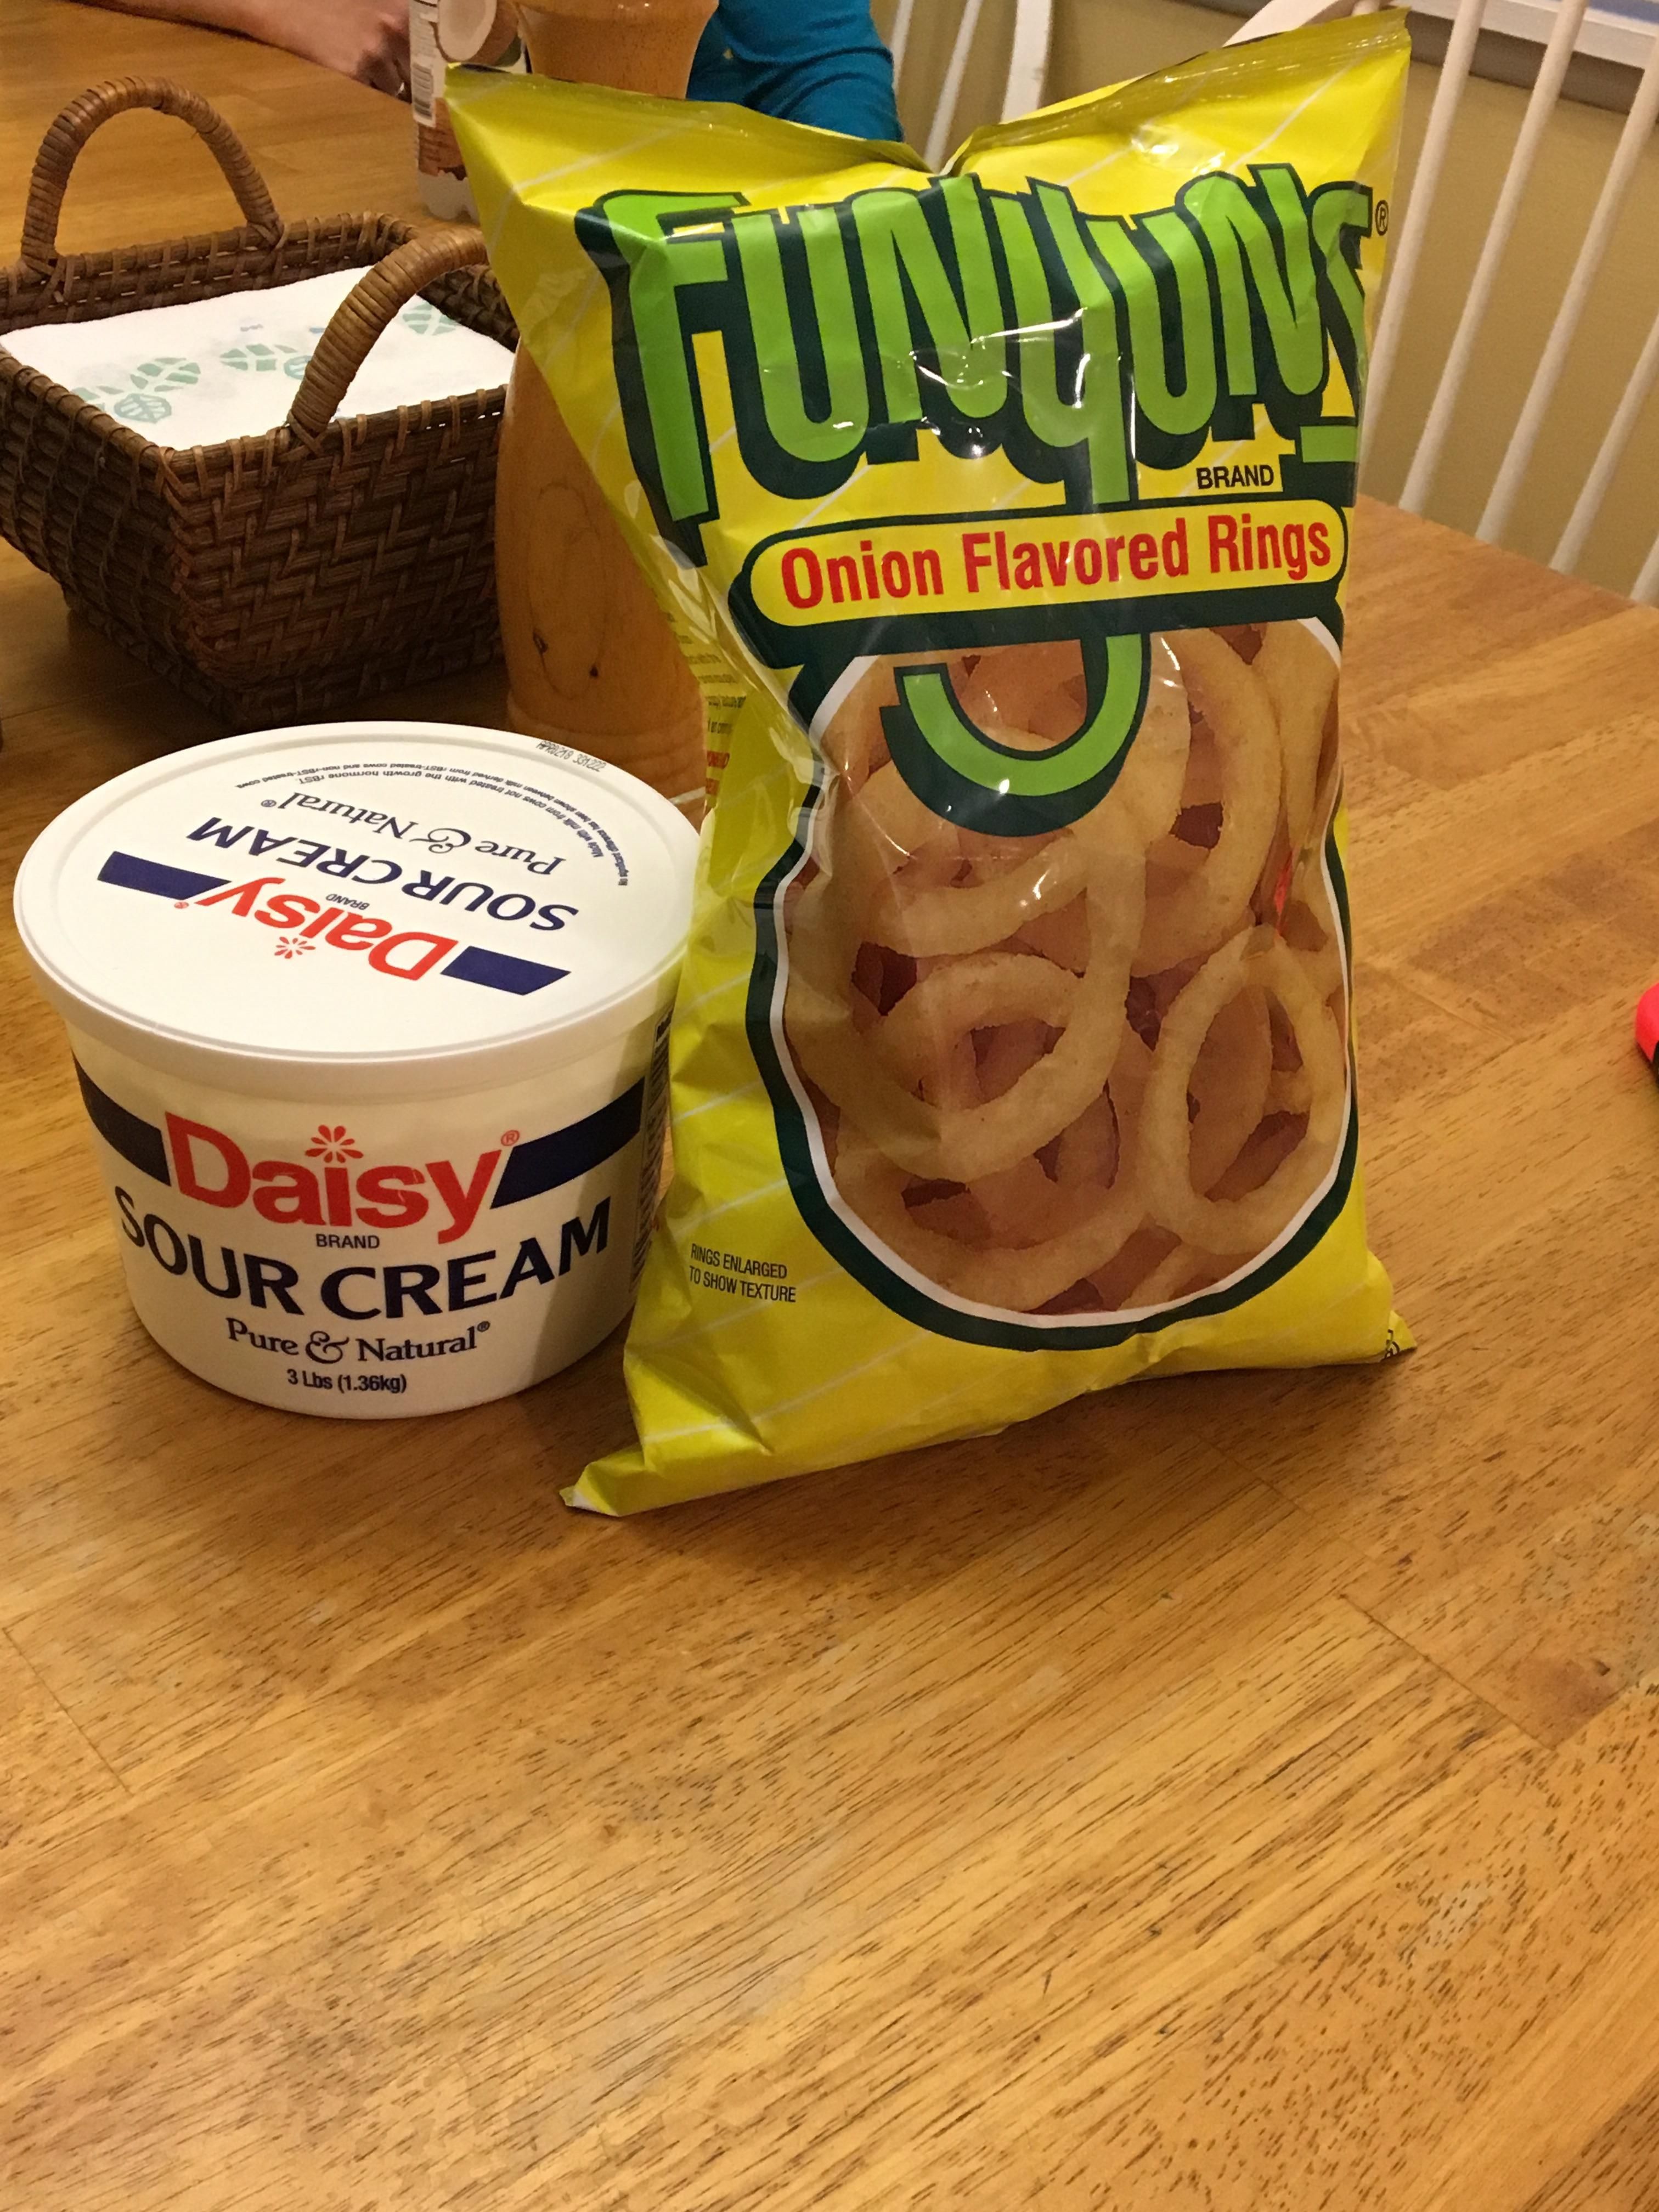 My wife’s grandma likes to buy us snacks whenever she goes to the store so we asked her for some sour cream and onion chips. We were amused by what she came back with.